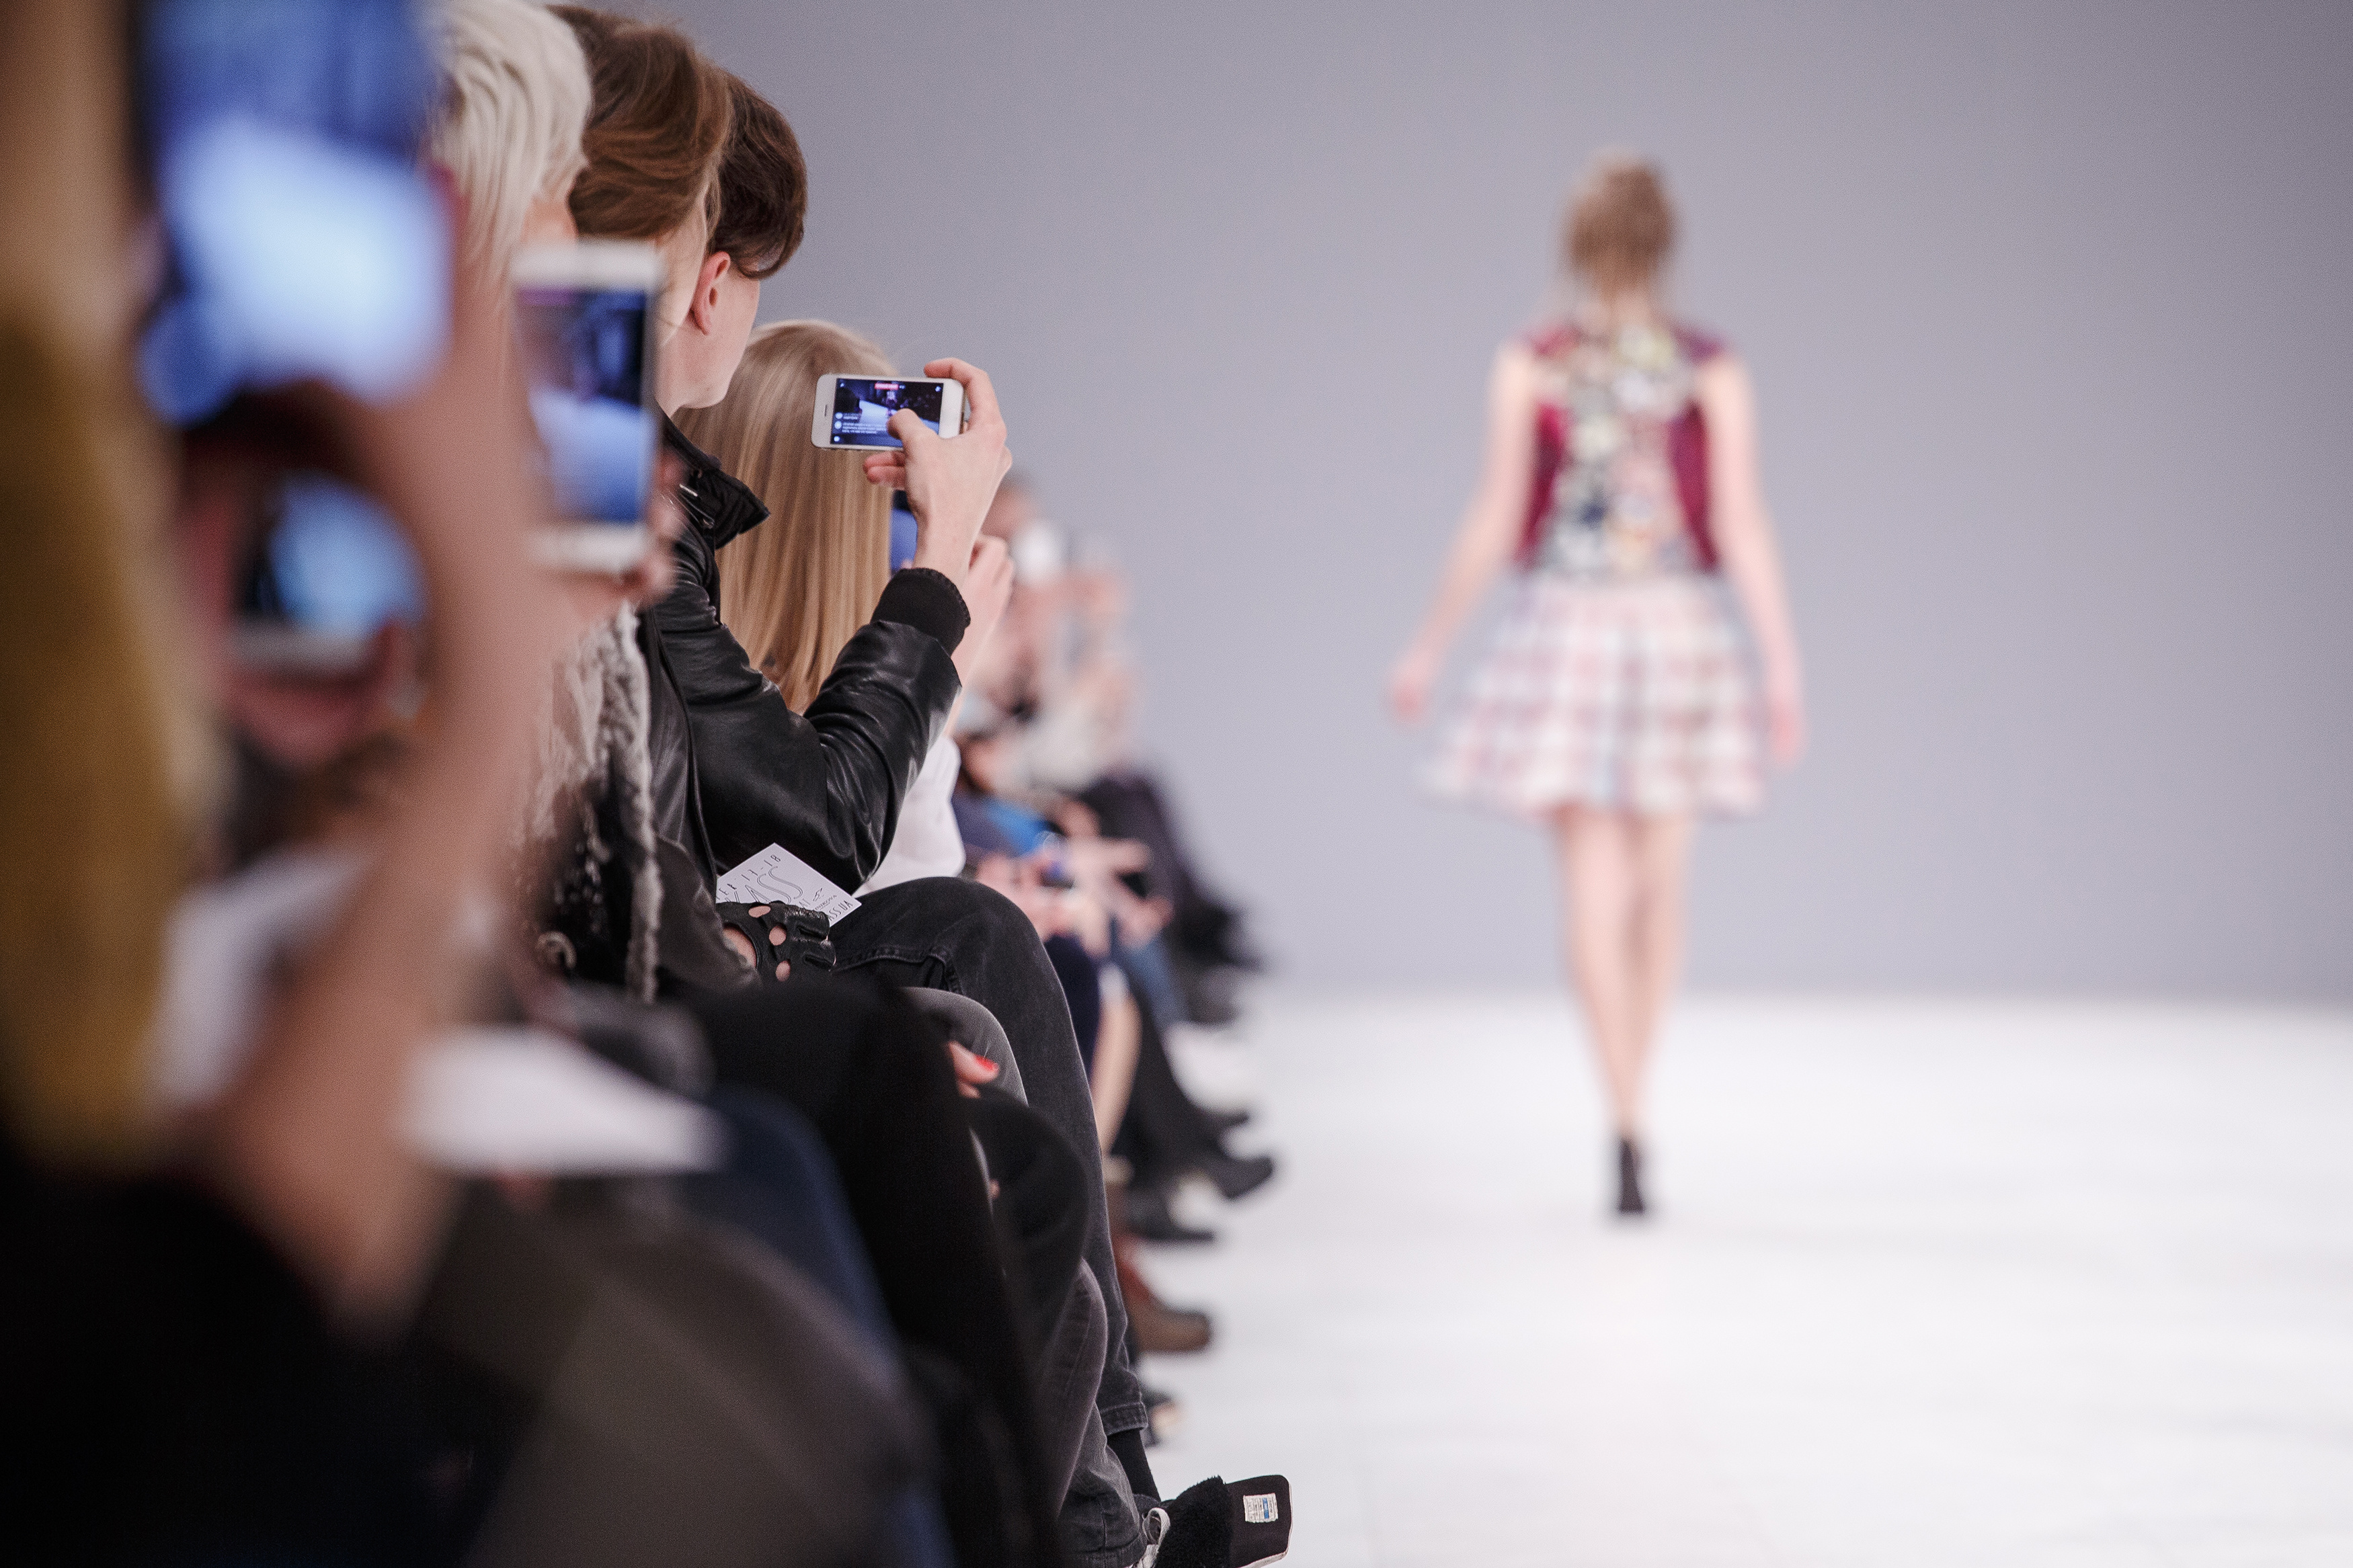 How Can Fashion Brands Expand Their Online Visibility During Fashion Week?